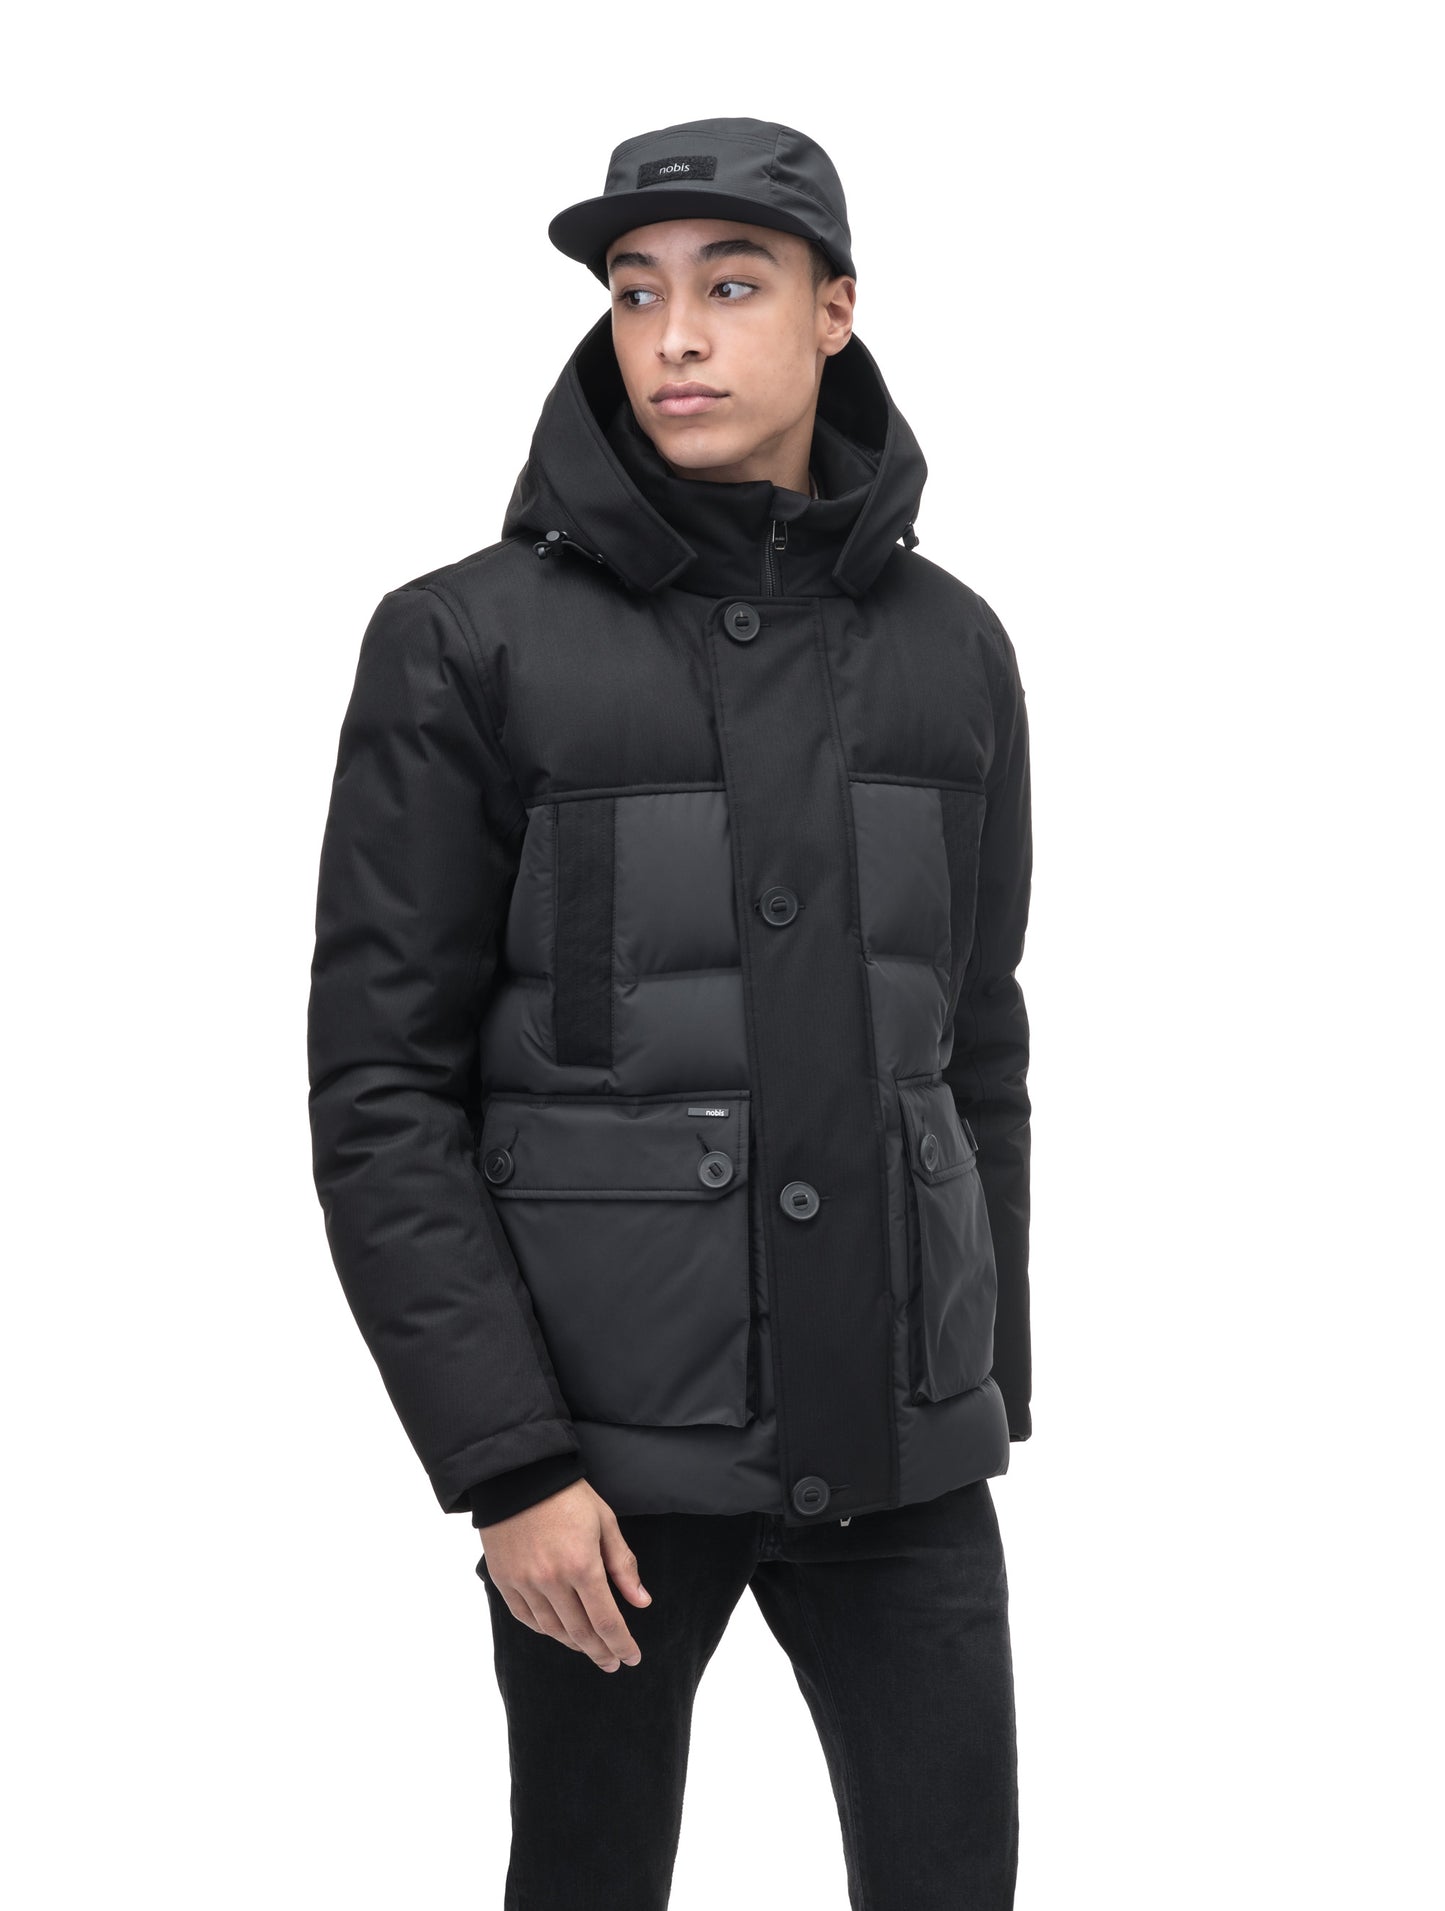 Cardinal Men's Puffer Parka in hip length, Canadian duck down insulation, removable hood, quilted body, and two-way front zipper, in Black